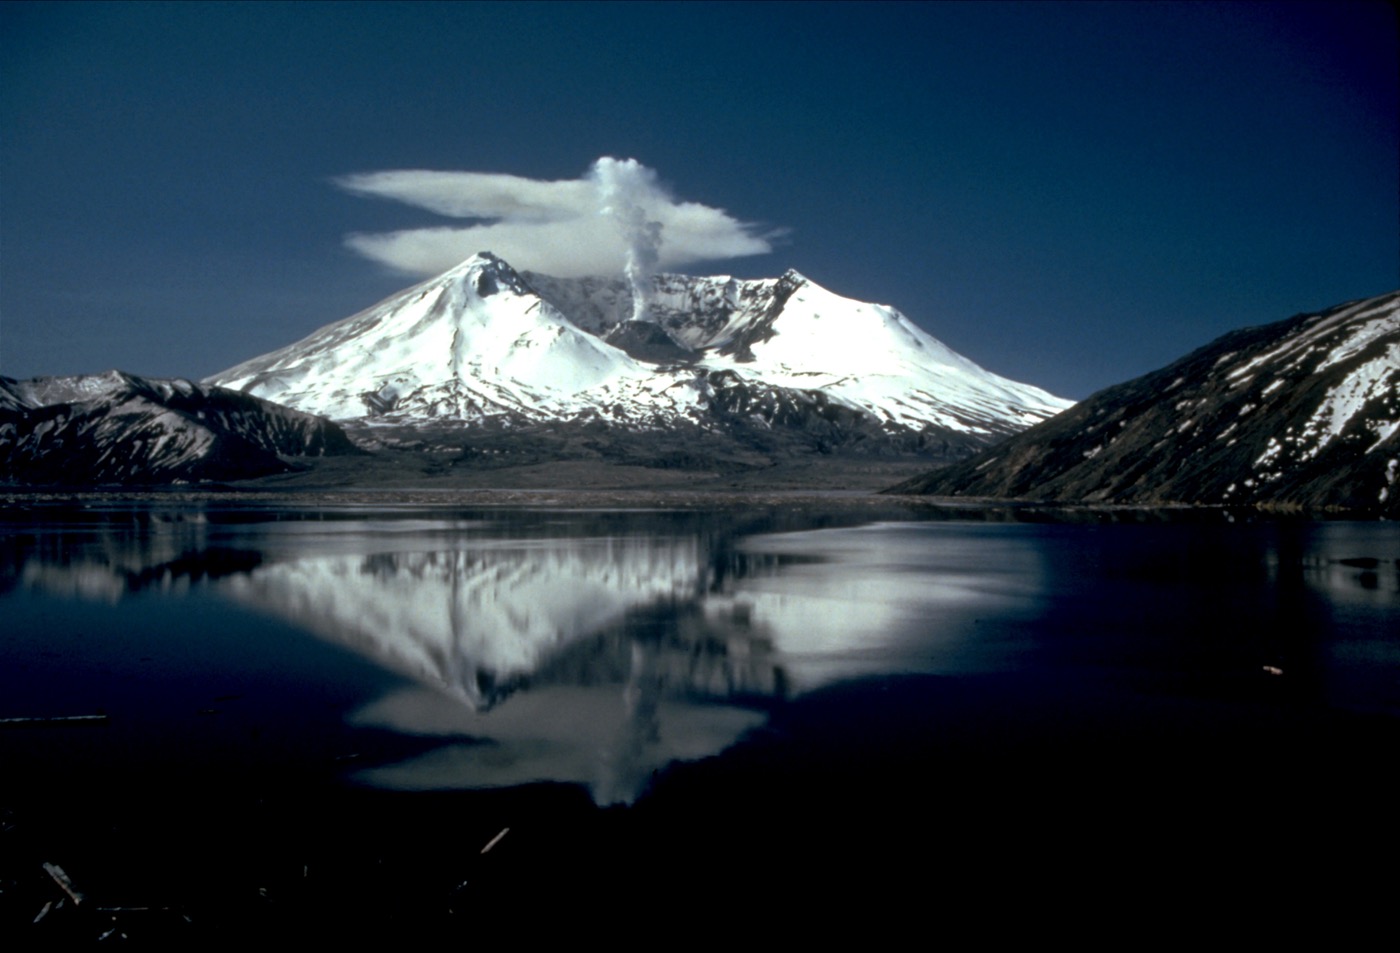 The crater of Mt. St. Helens with a plume of smoke escaping.